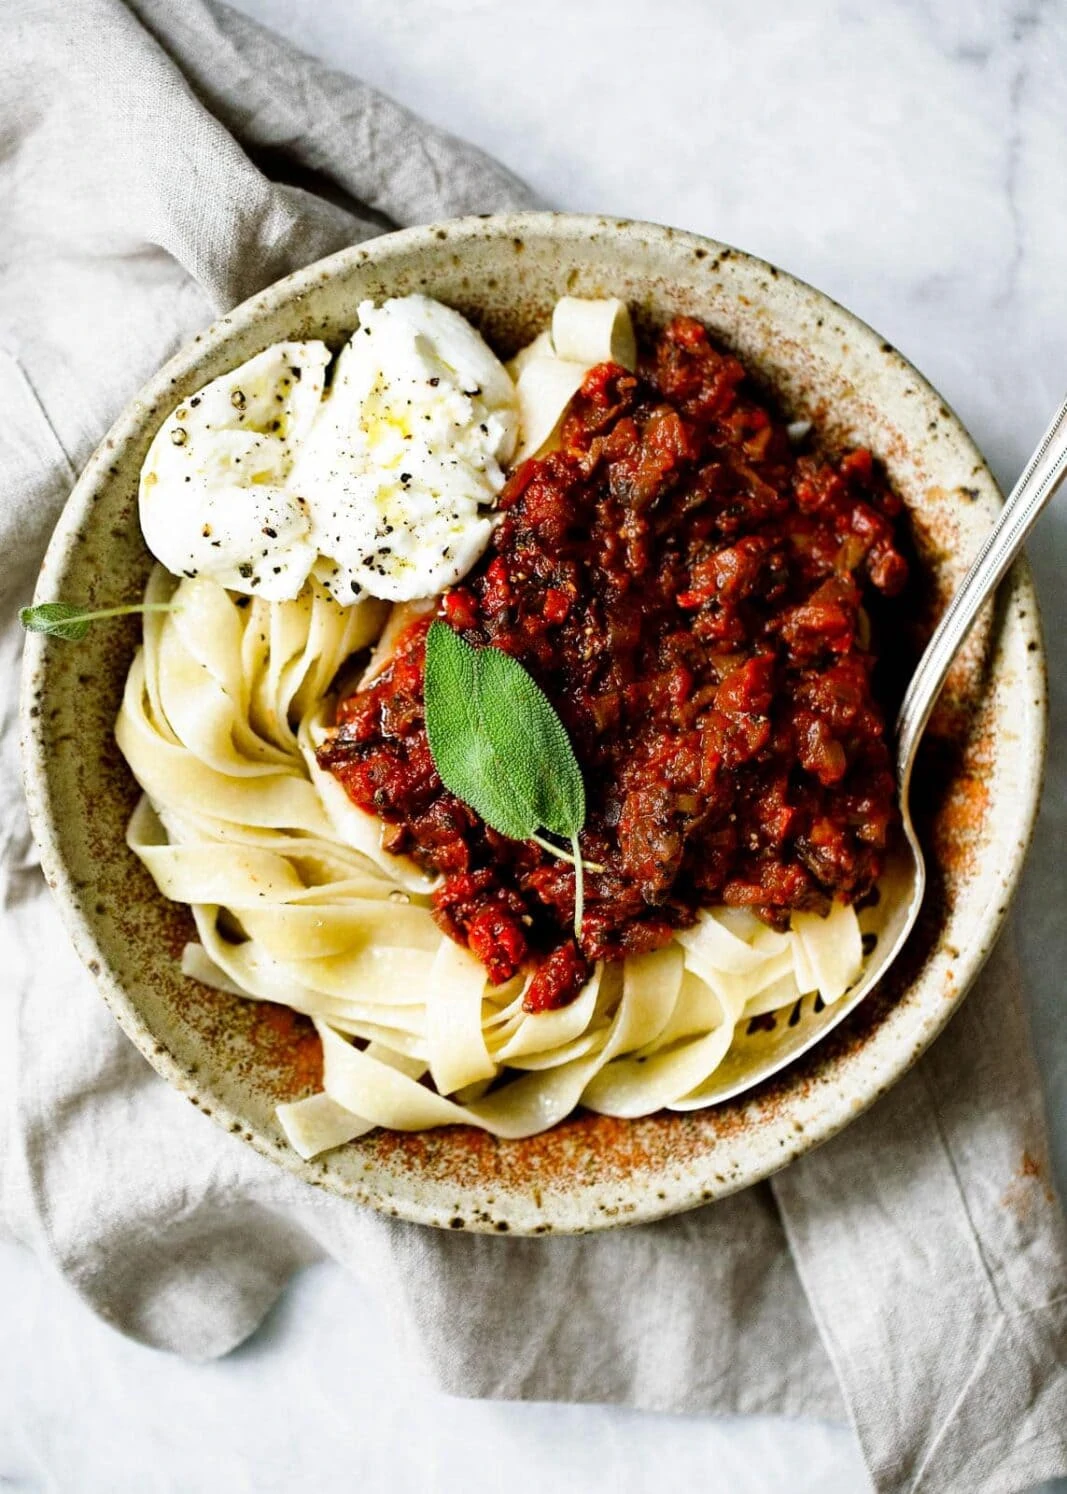 A mushroom bolognese so hearty and delicious you won't notice it's meatless!